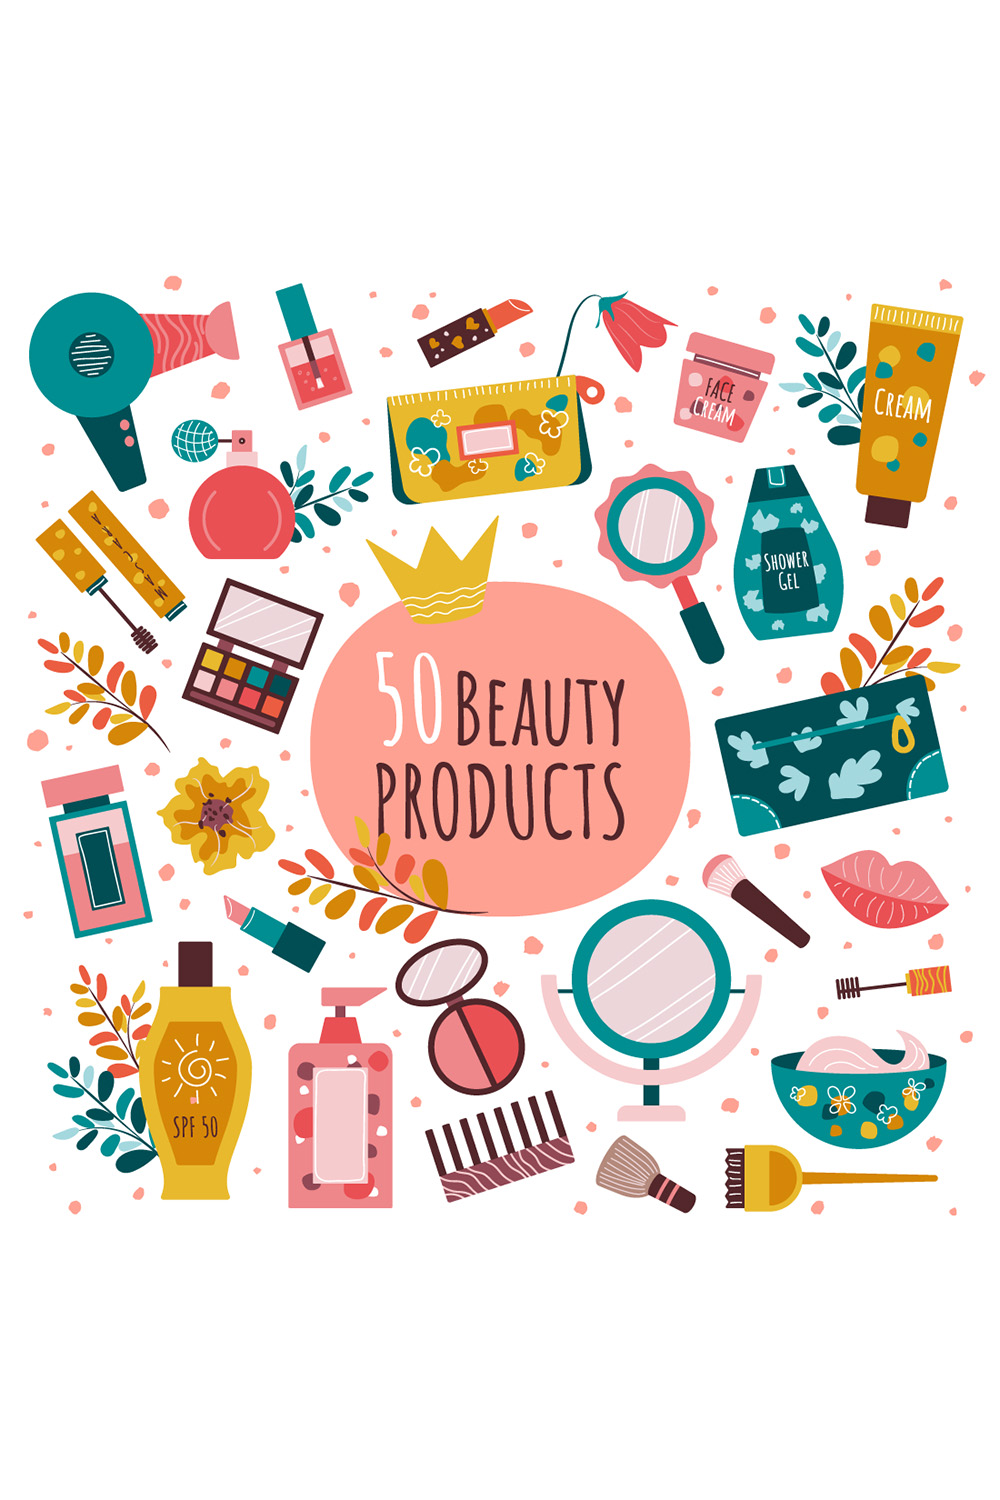 Set of 50 Beauty Products & Makeup pinterest preview image.